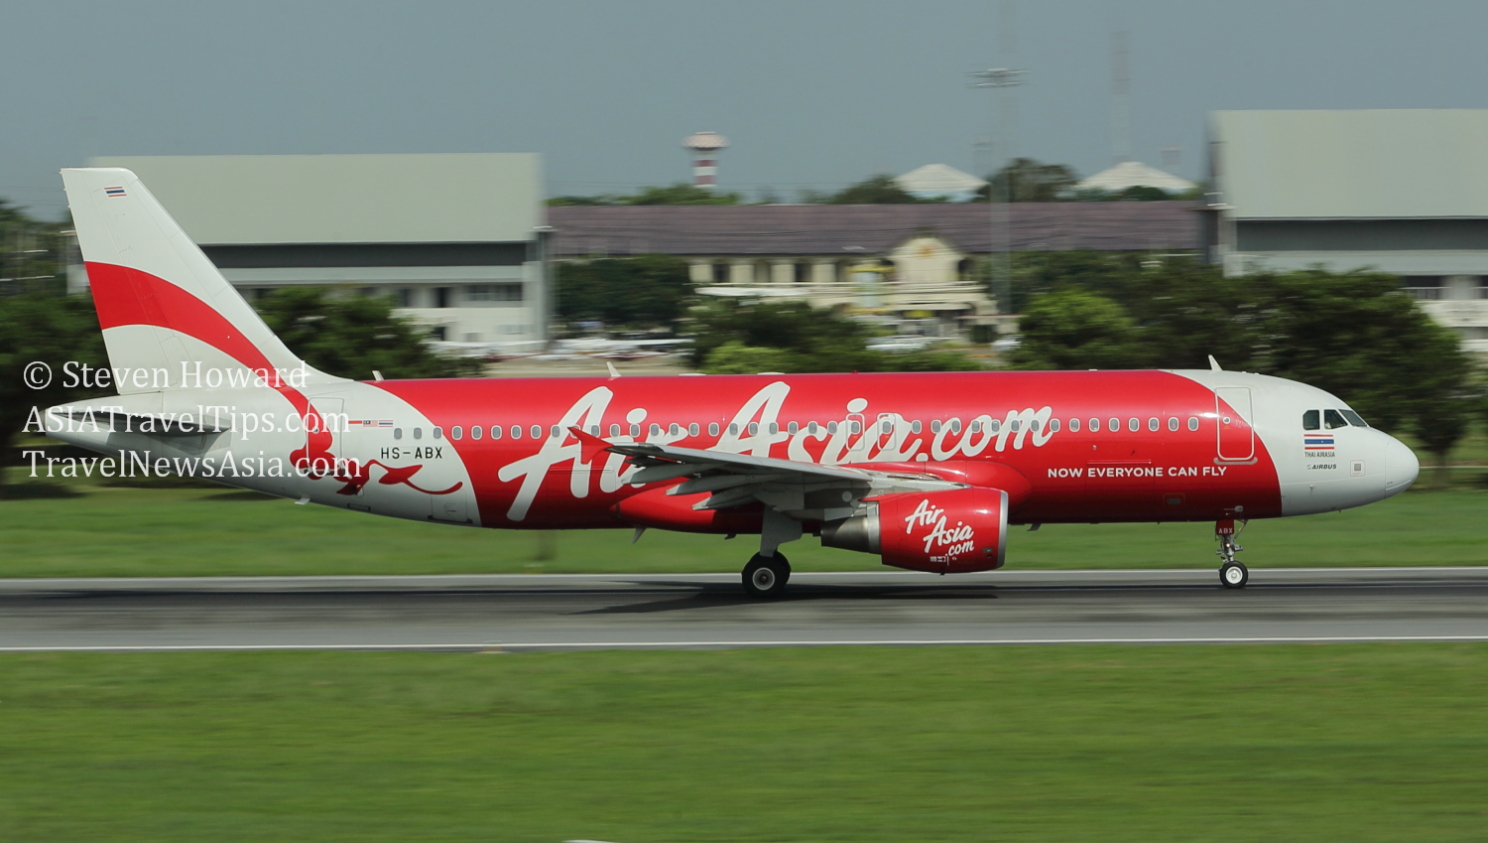 Thai AirAsia A320 at DMK. Picture by Steven Howard of TravelNewsAsia.com Click to enlarge.